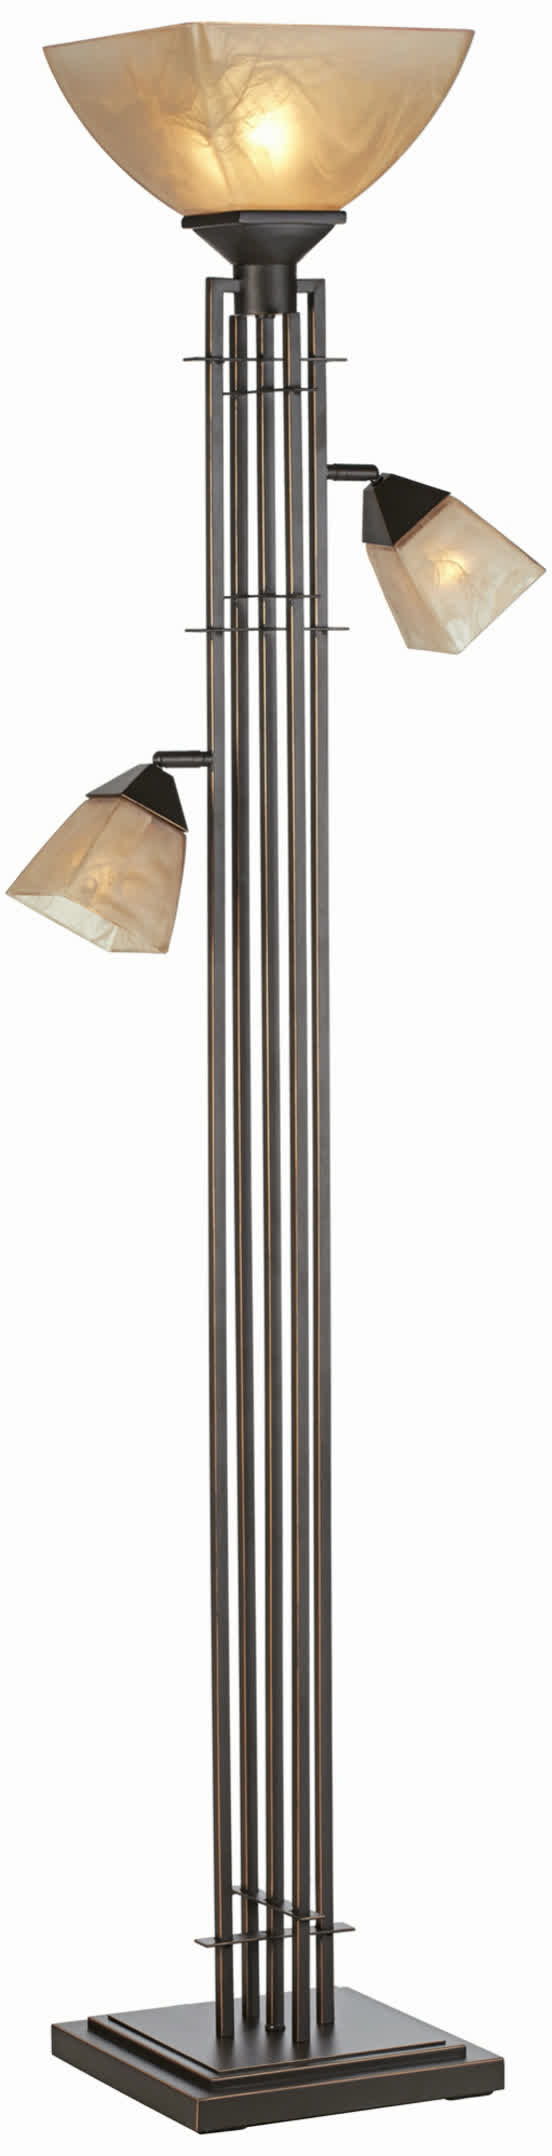 City Lines - Floor Lamp - Bronze With Copper Highlights